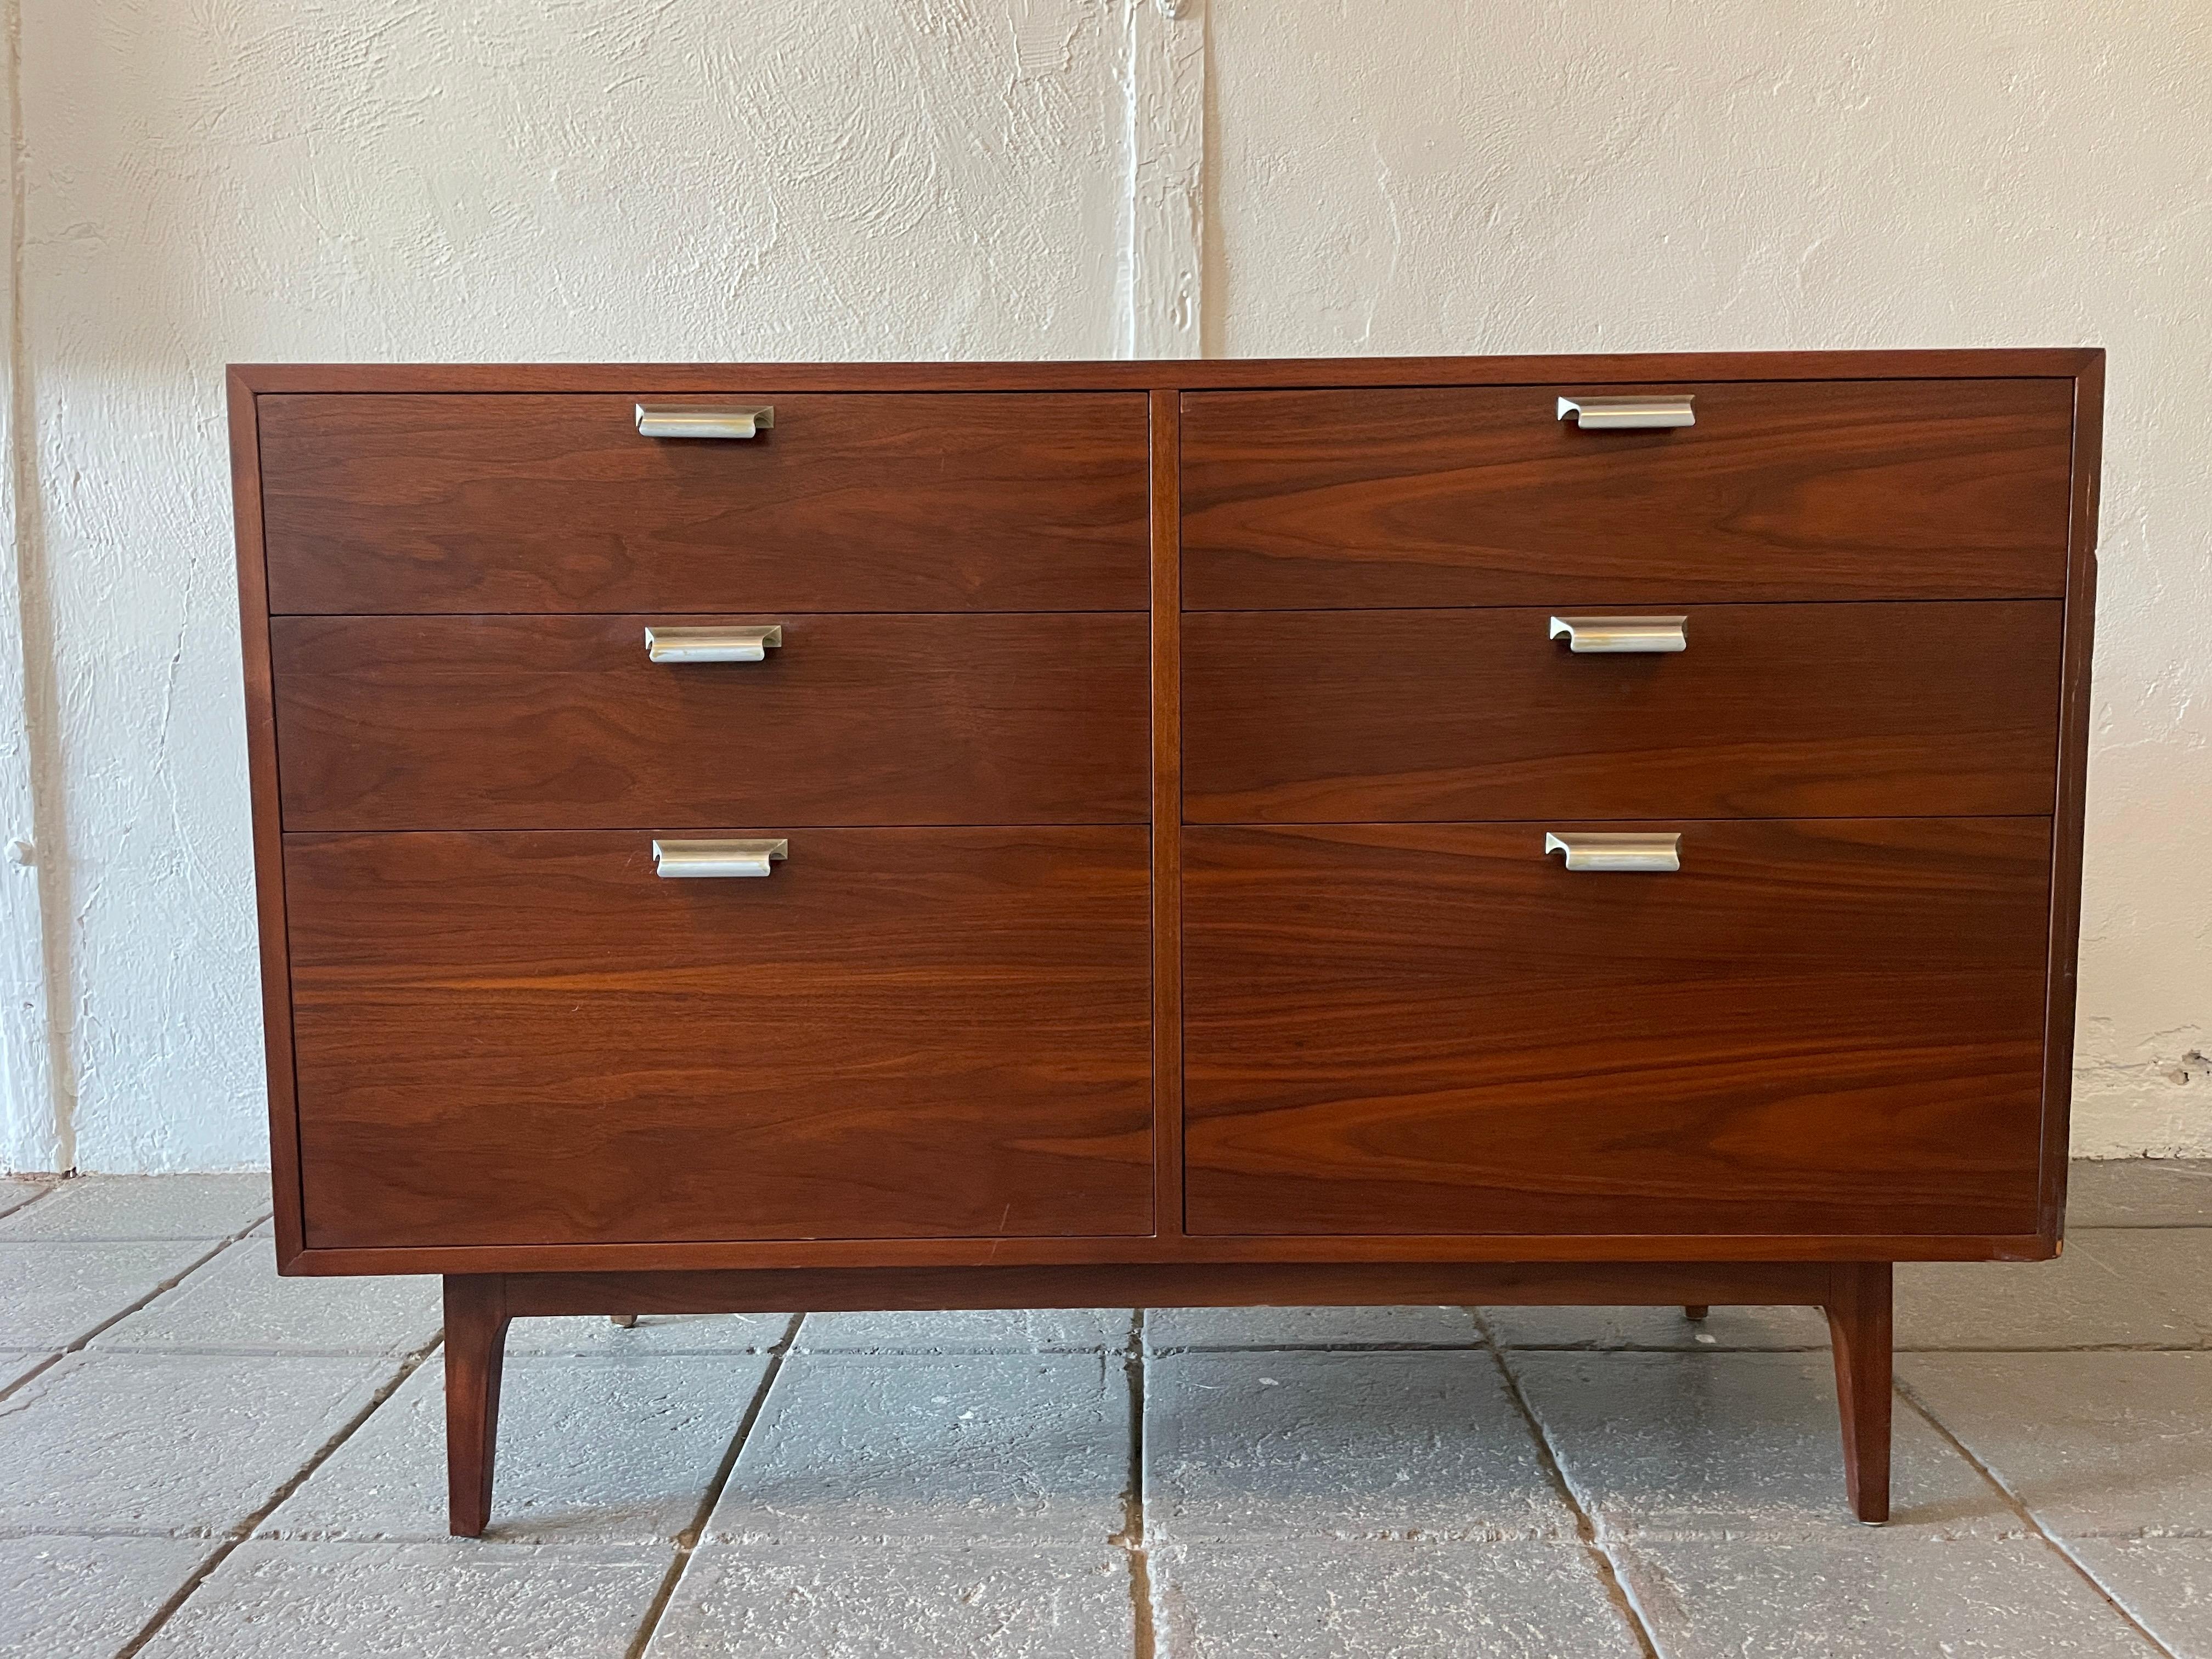 Mid-Century Modern walnut 6 drawer dresser credenza with aluminum handles. Beautiful walnut grain - solid wood drawers. Circa 1960s. All drawers slide smooth - clean inside and out. Located in Brooklyn NYC.